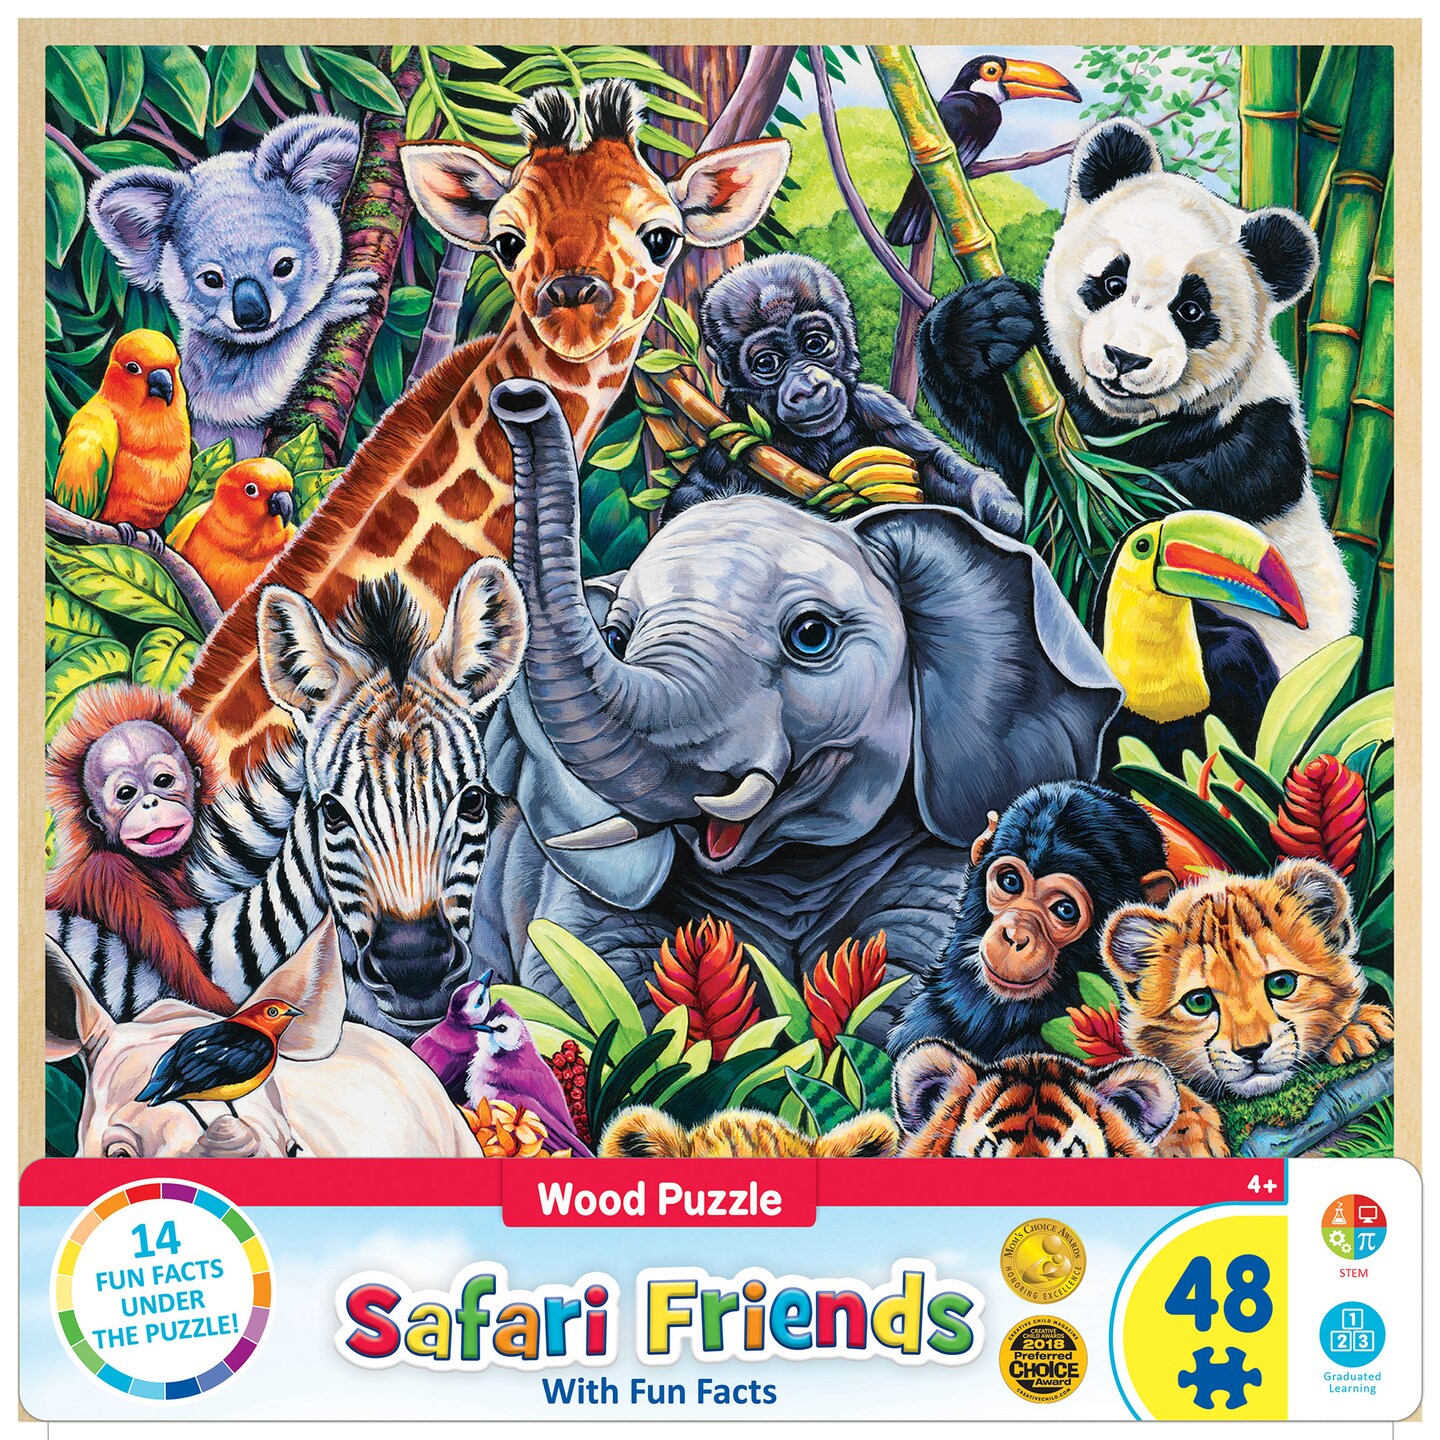 MasterPieces 48 Piece Fun Facts Jigsaw Puzzle for Kids - Safari Friends  Wood Puzzle - 12x12